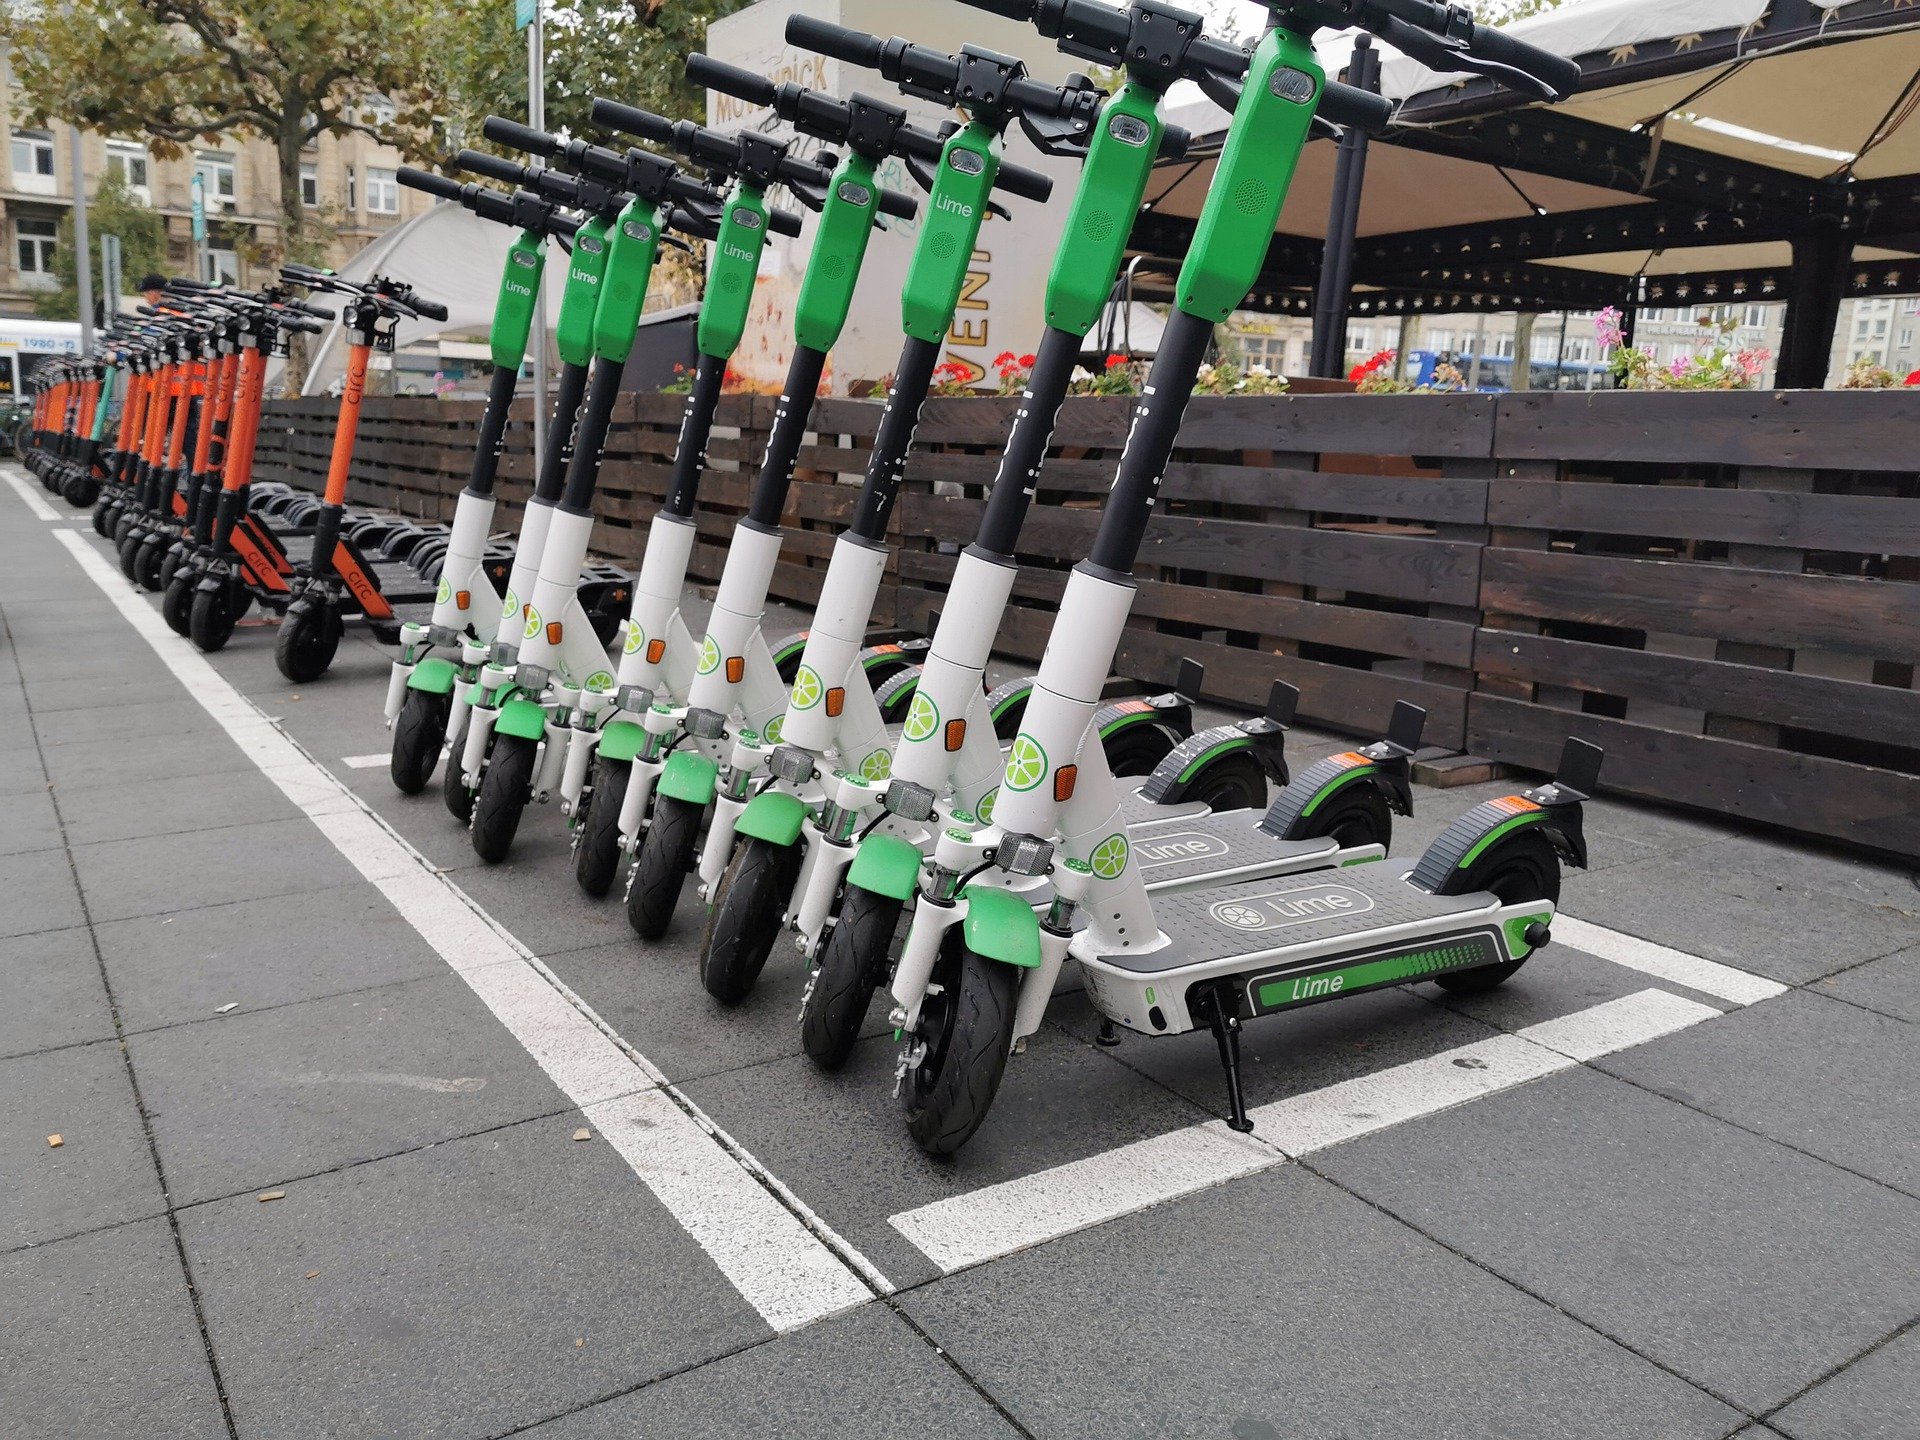 A row of white and green Lime scooters, followed by a more distant row of orange and black scooters in a scooter parking spot marked by a white painted line. In the background is a wooden fence and large outdoor umbrellas.